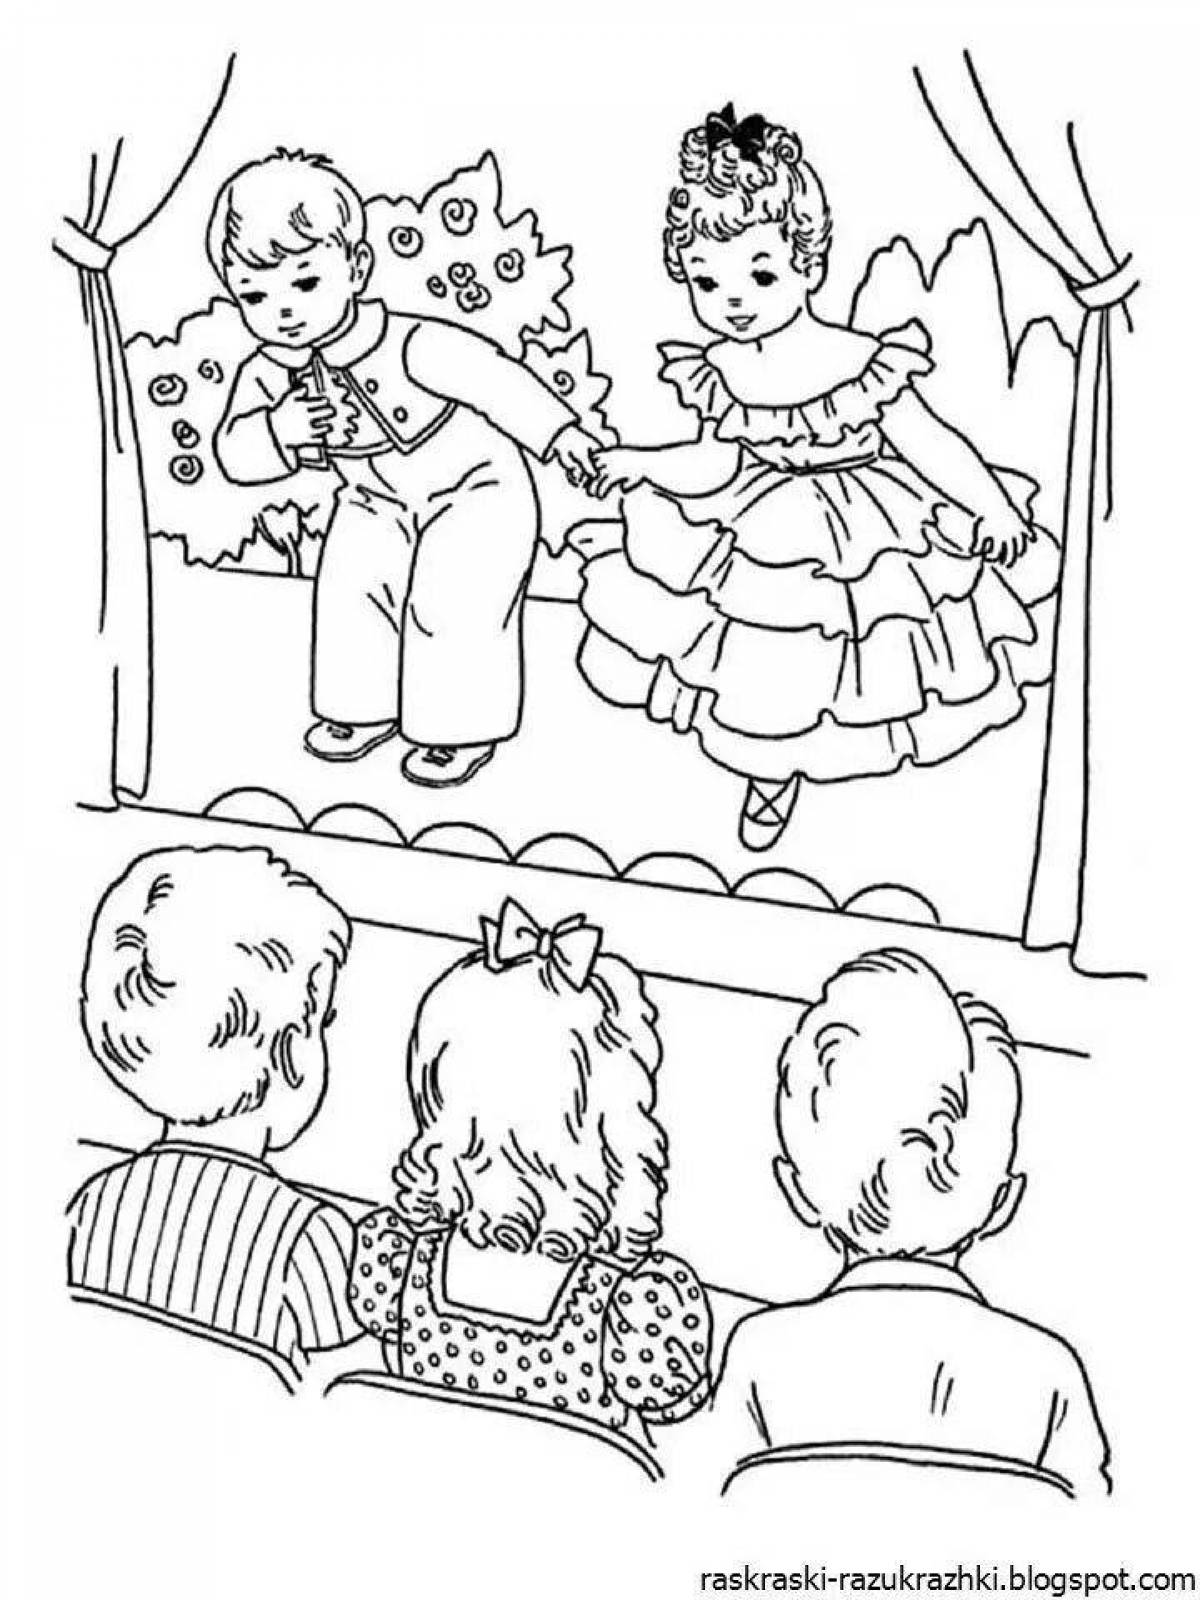 Coloring page exciting theater performer